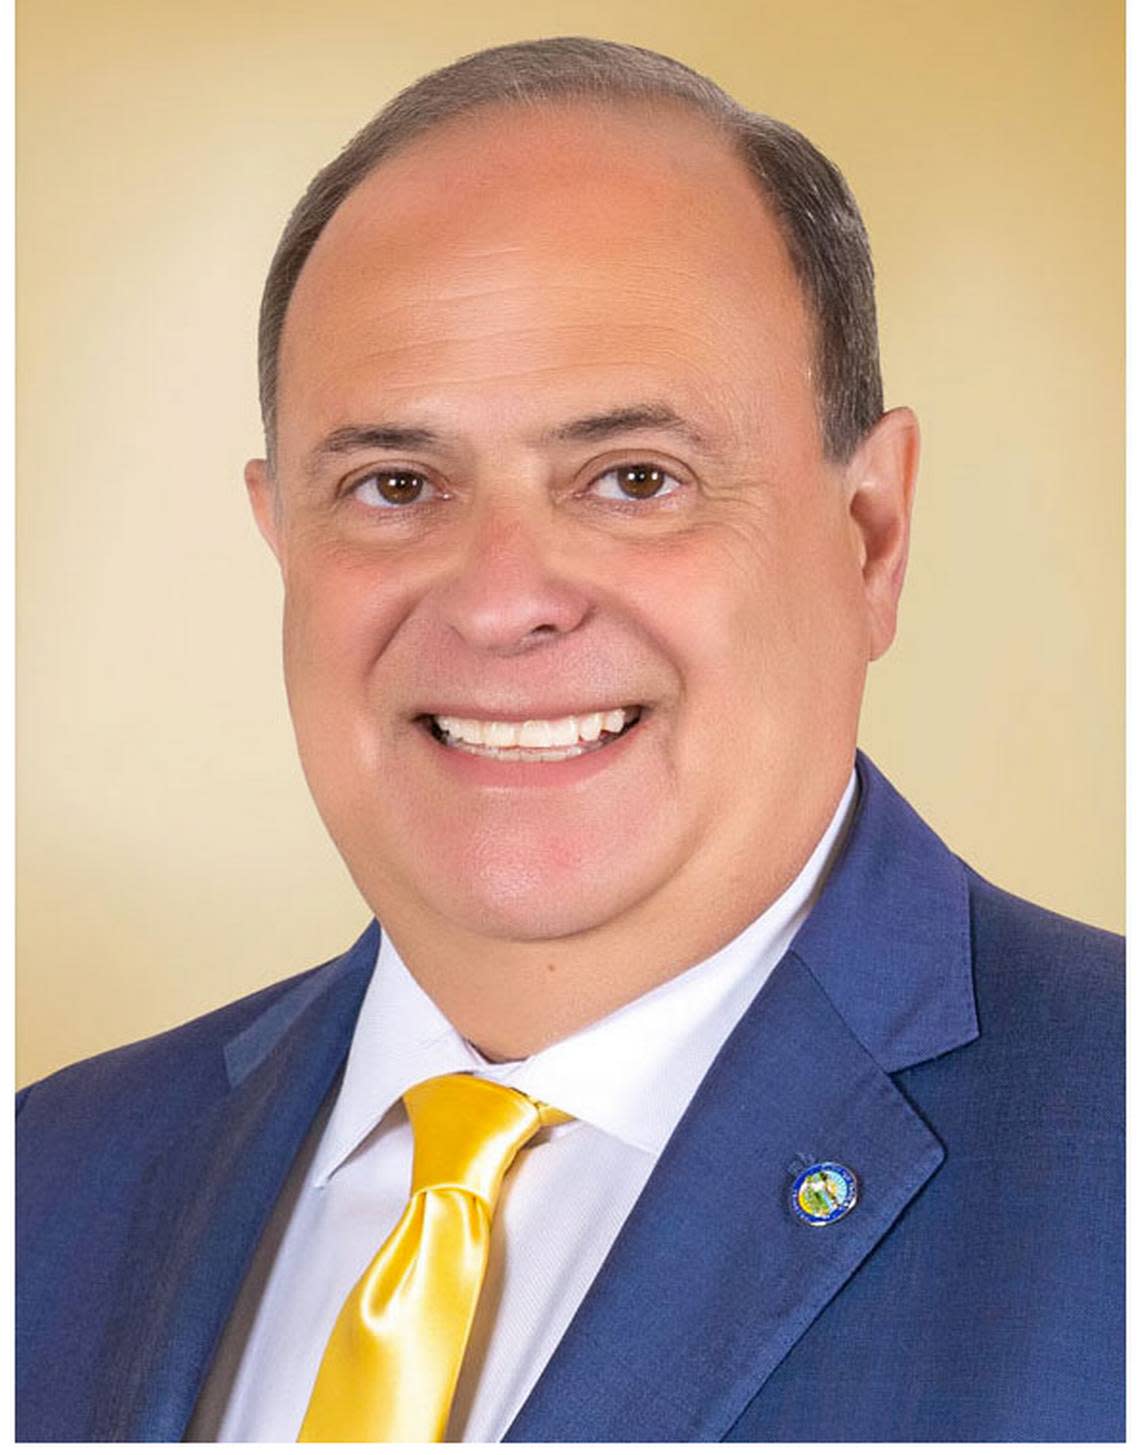 Doral Mayor Juan Carlos “J.C.” Bermudez is a candidate for Miami-Dade County’s District 12 commission seat. Former President Donald Trump endorsed Bermudez. Trump owns a golf resort in Doral.